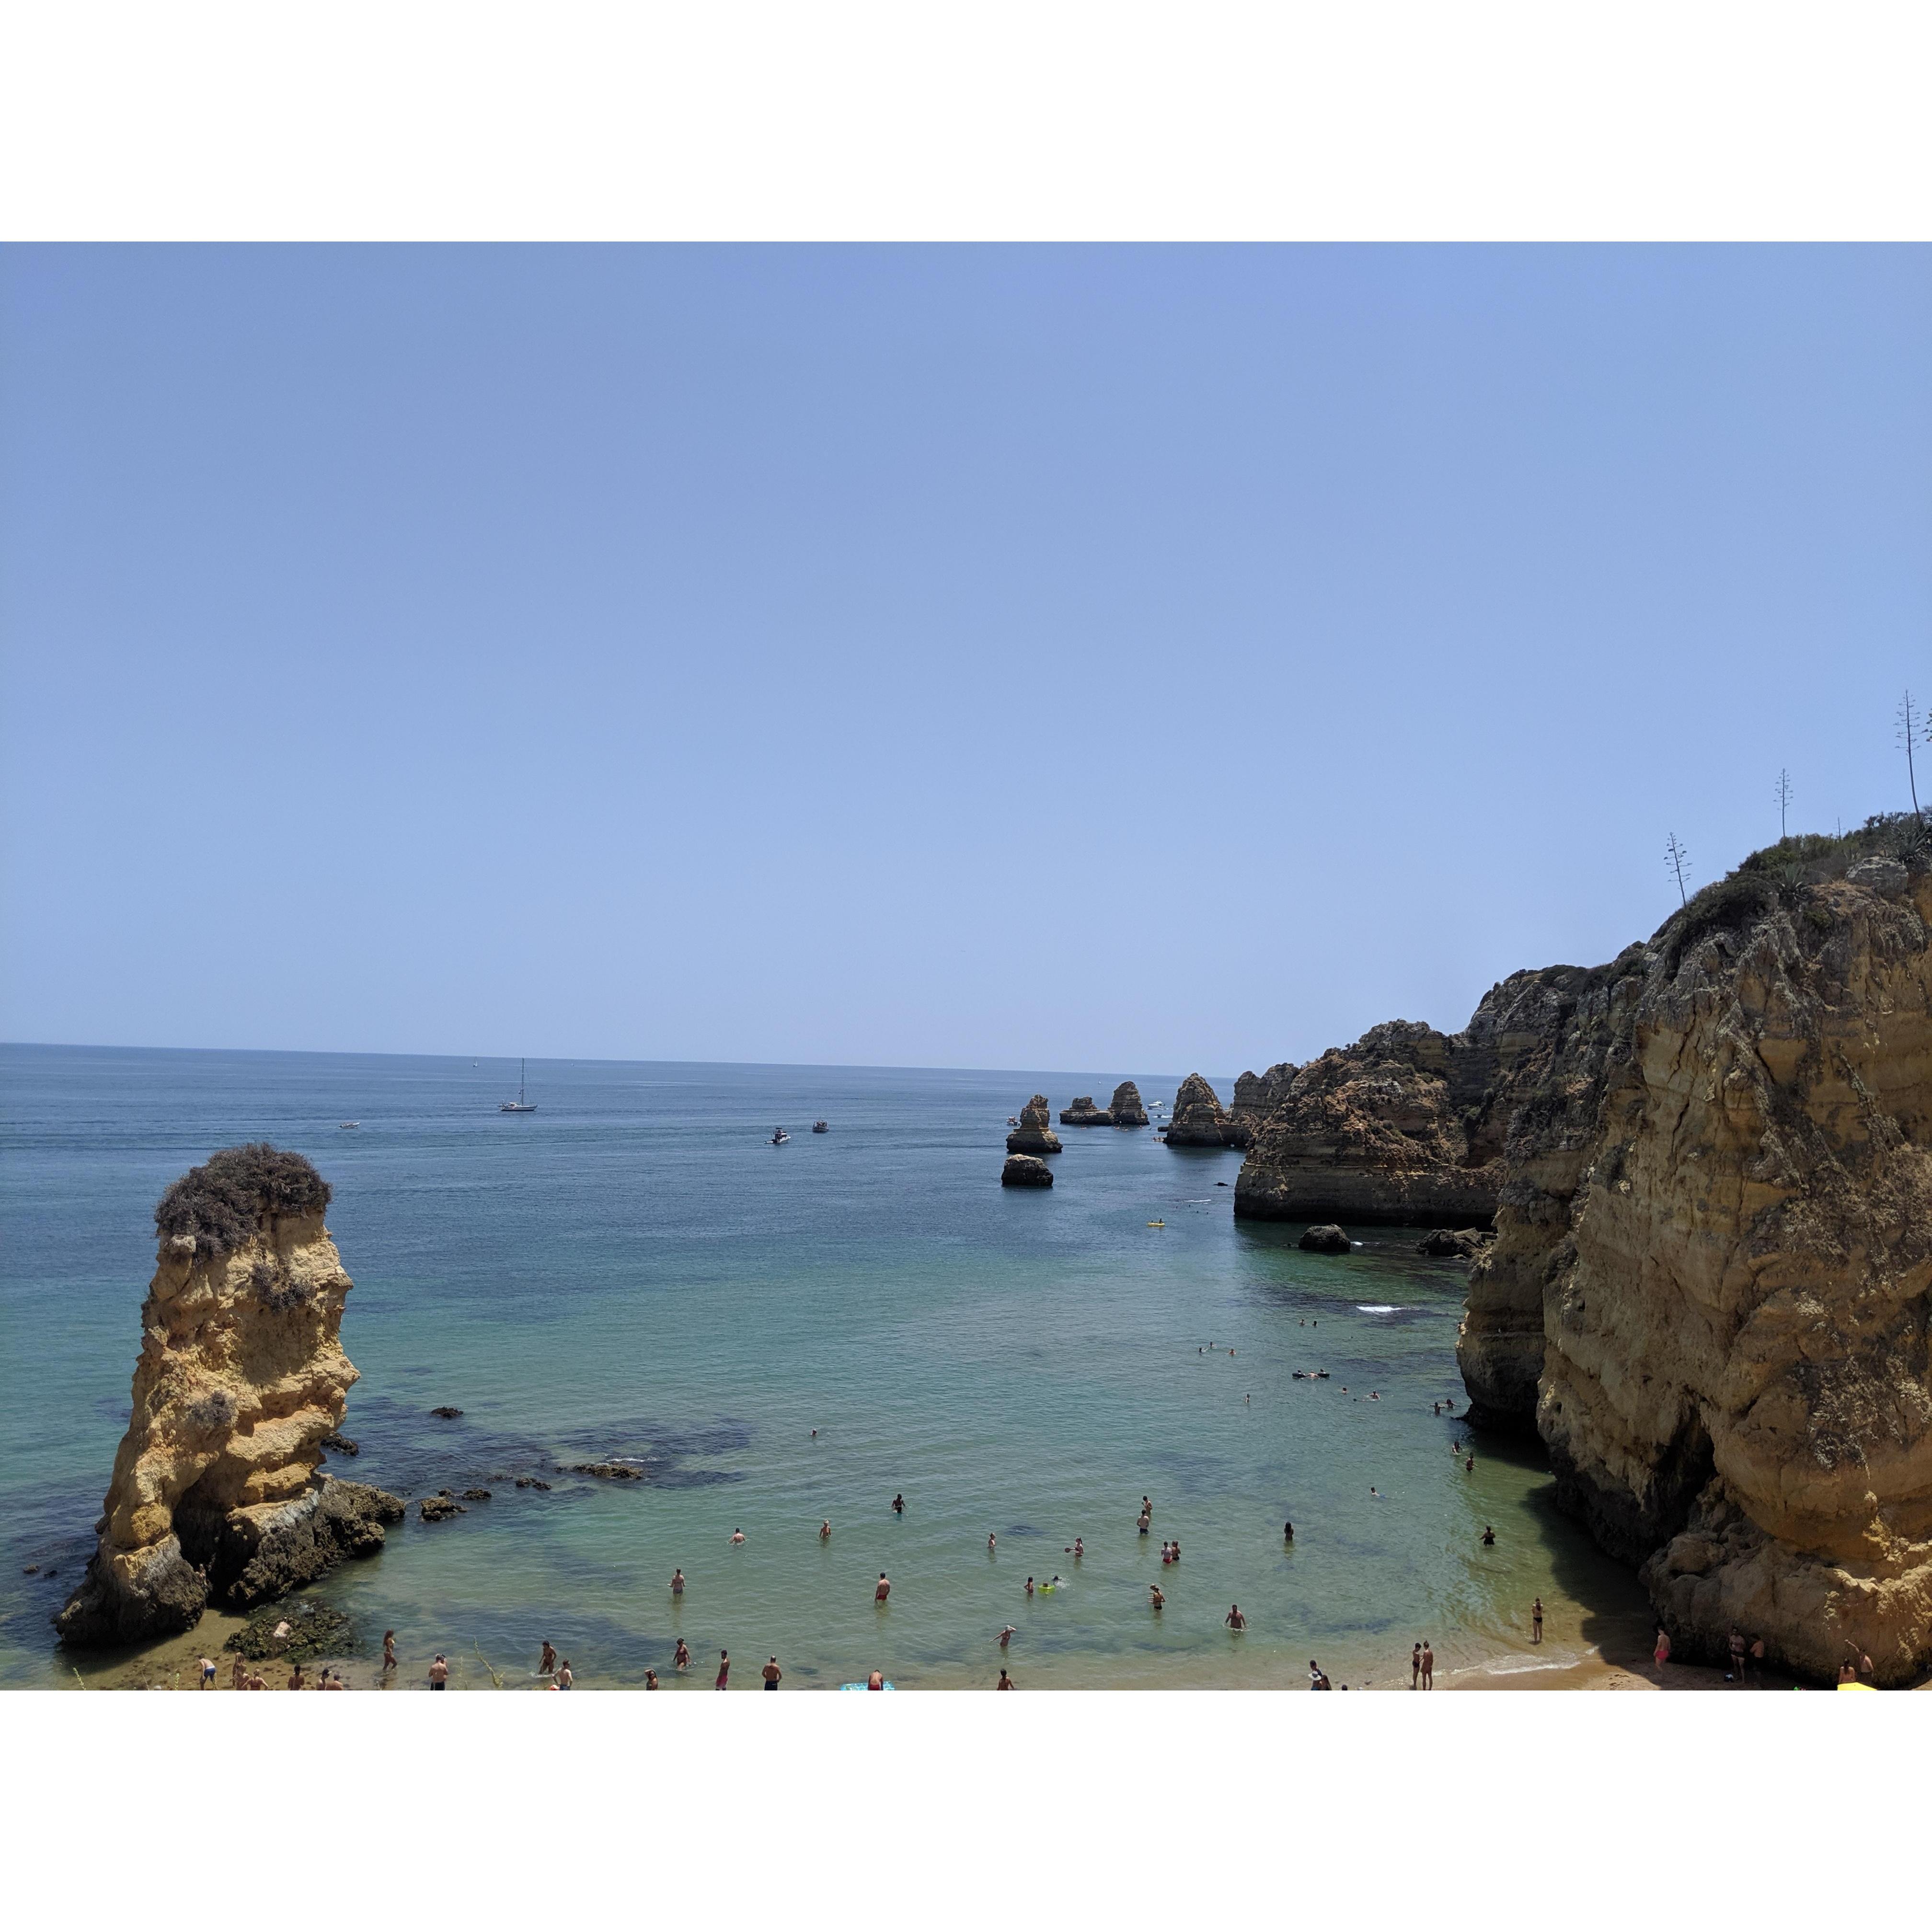 Dona Ana beach in Lagos, which has been voted one of the most beautiful beaches in the world, and you can see why!